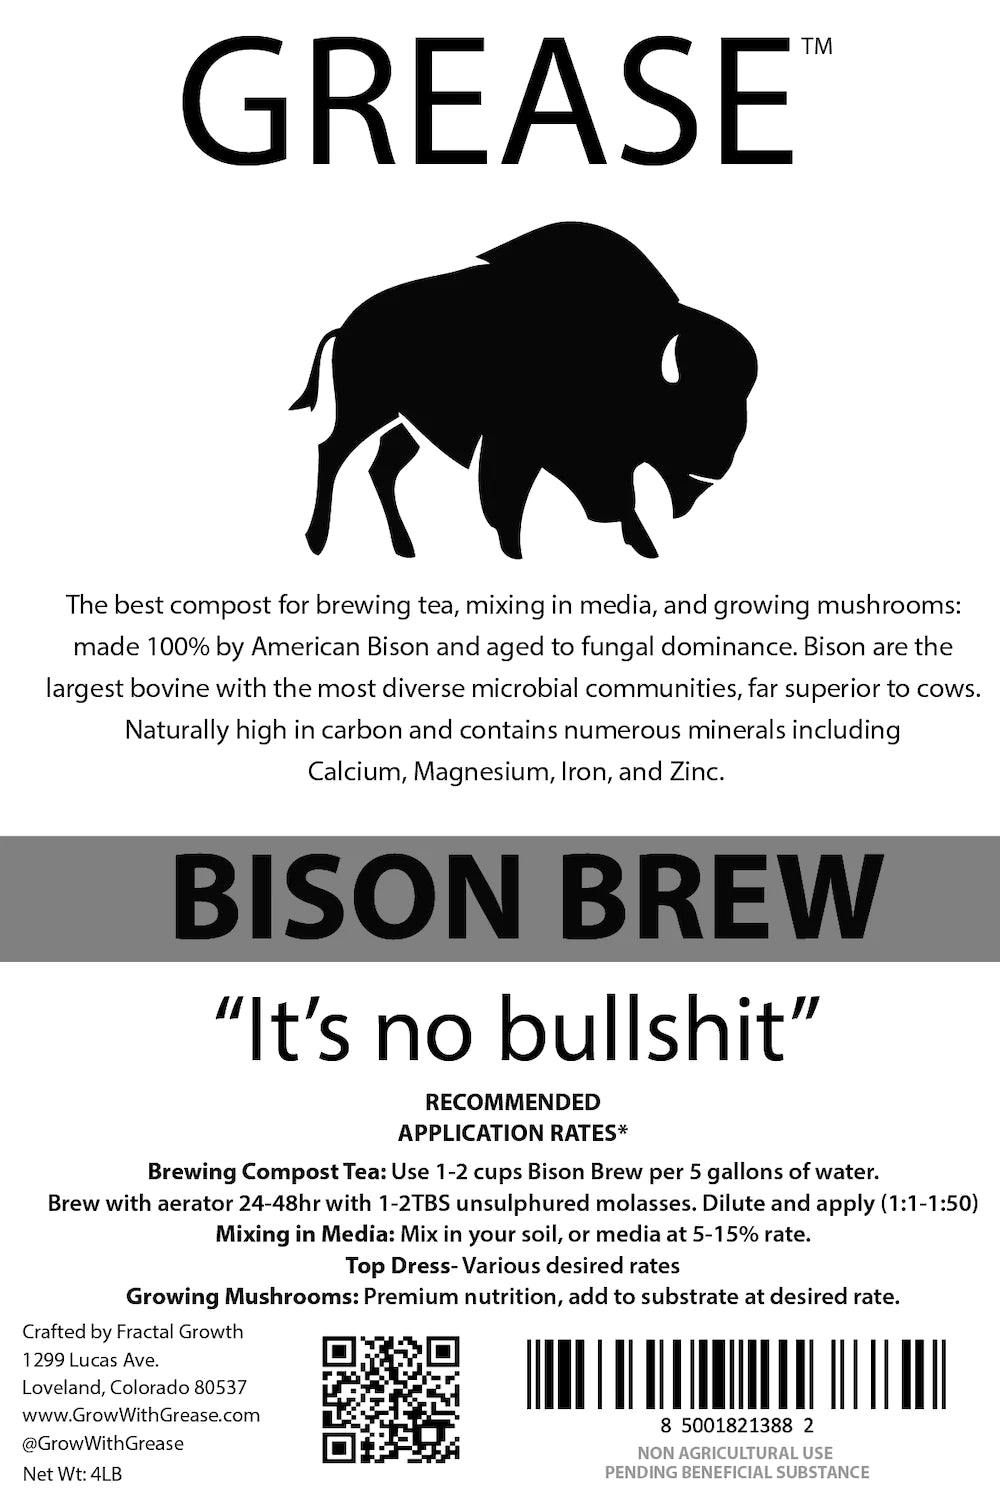 GREASE Bison Brew Label